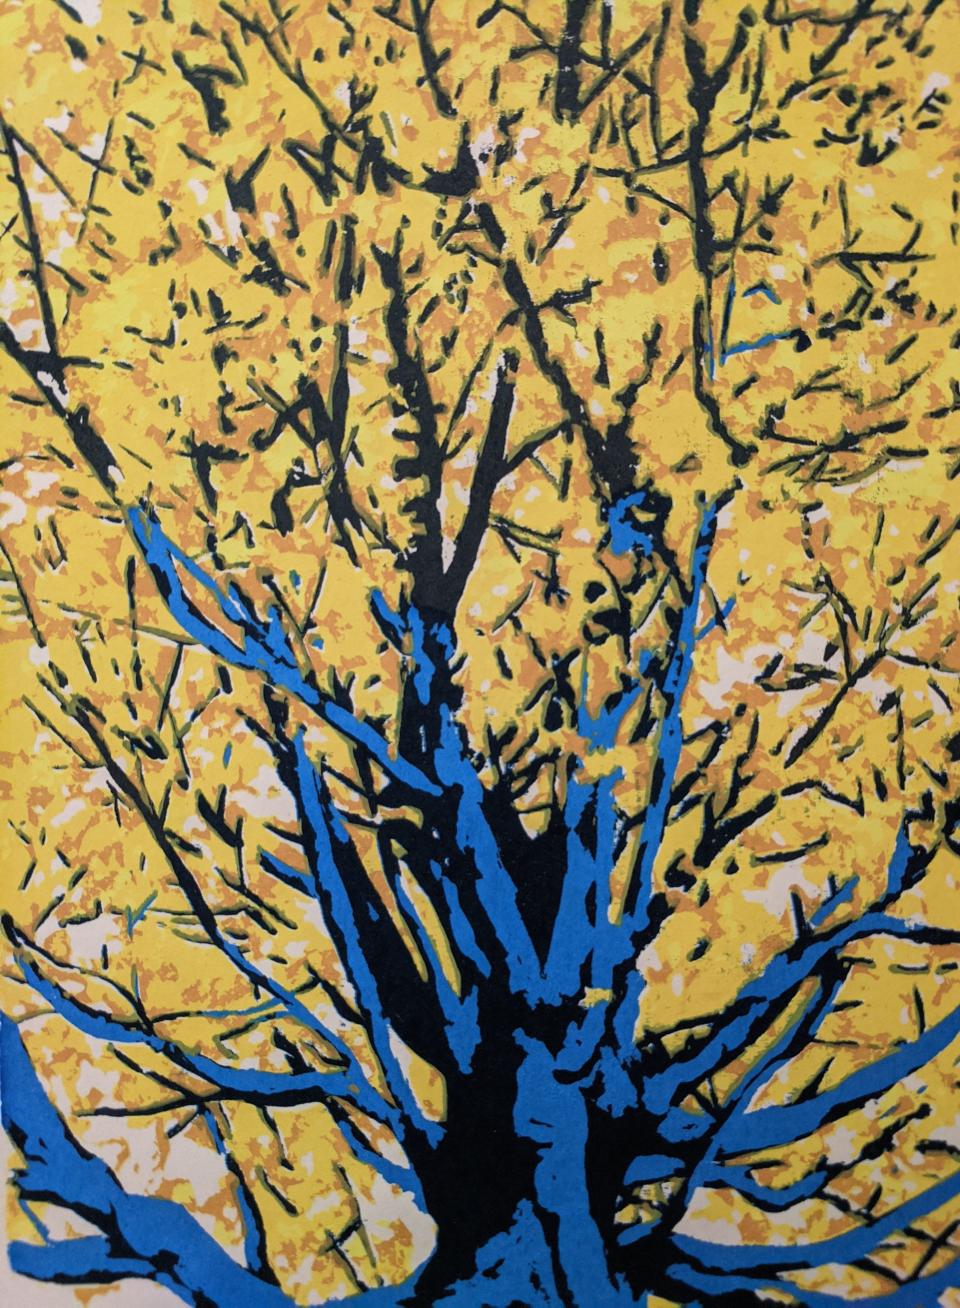 “Blue Tree,” a reduction linotype by Katy O’Gorman Rhodebeck